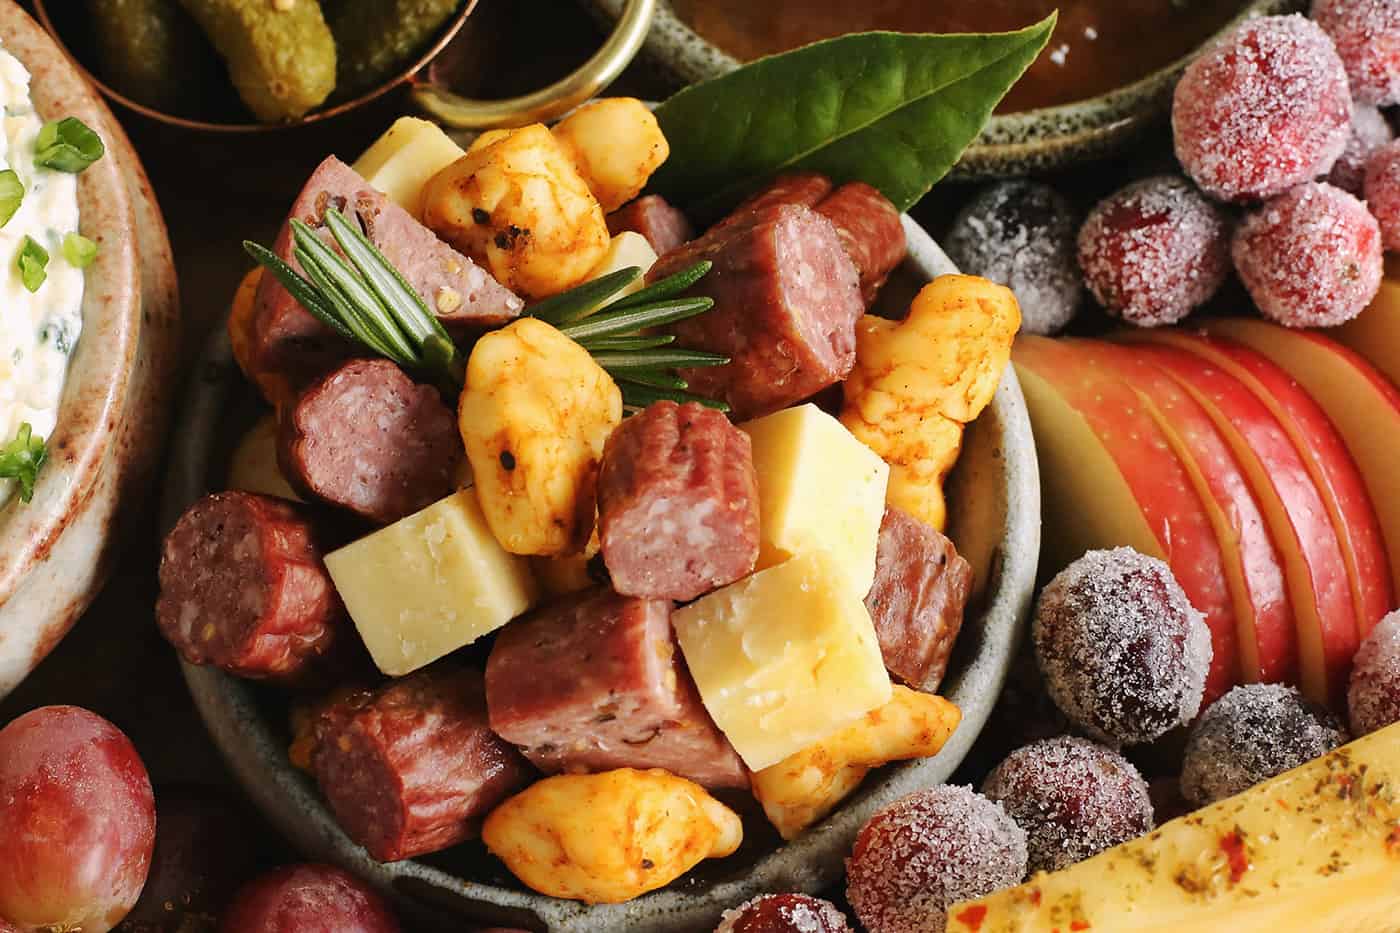 "Meat & Cheese Trail Mix" with bites of meats and cheeses in a bowl